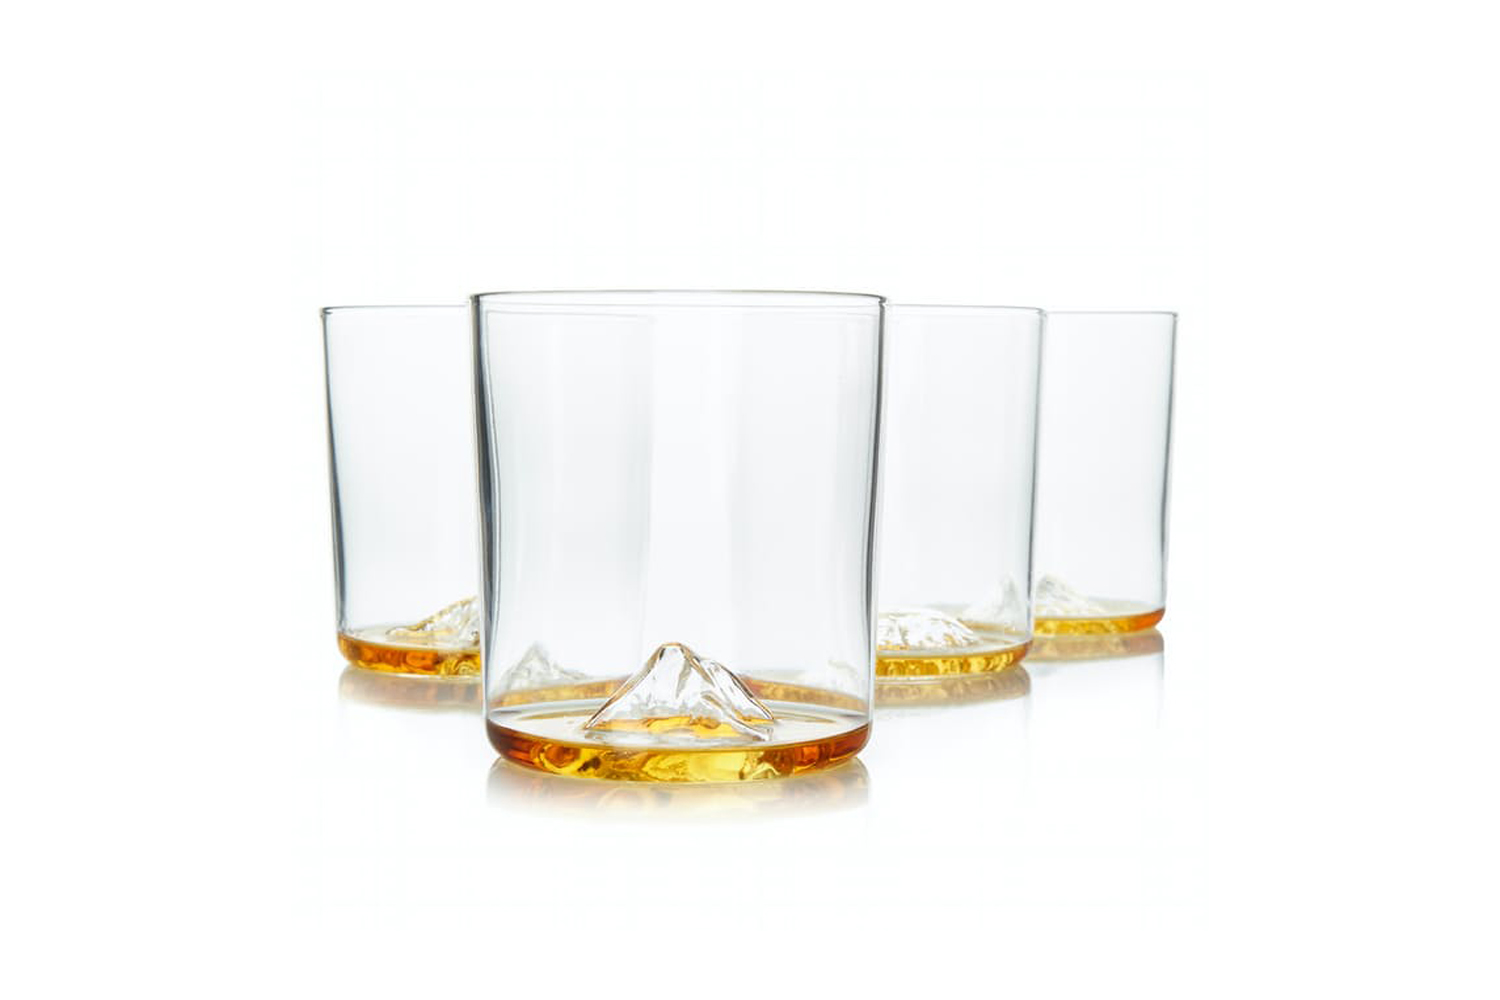 https://www.themanual.com/wp-content/uploads/sites/9/2021/03/huckberry-whiskey-peaks-glass.jpg?fit=800%2C800&p=1